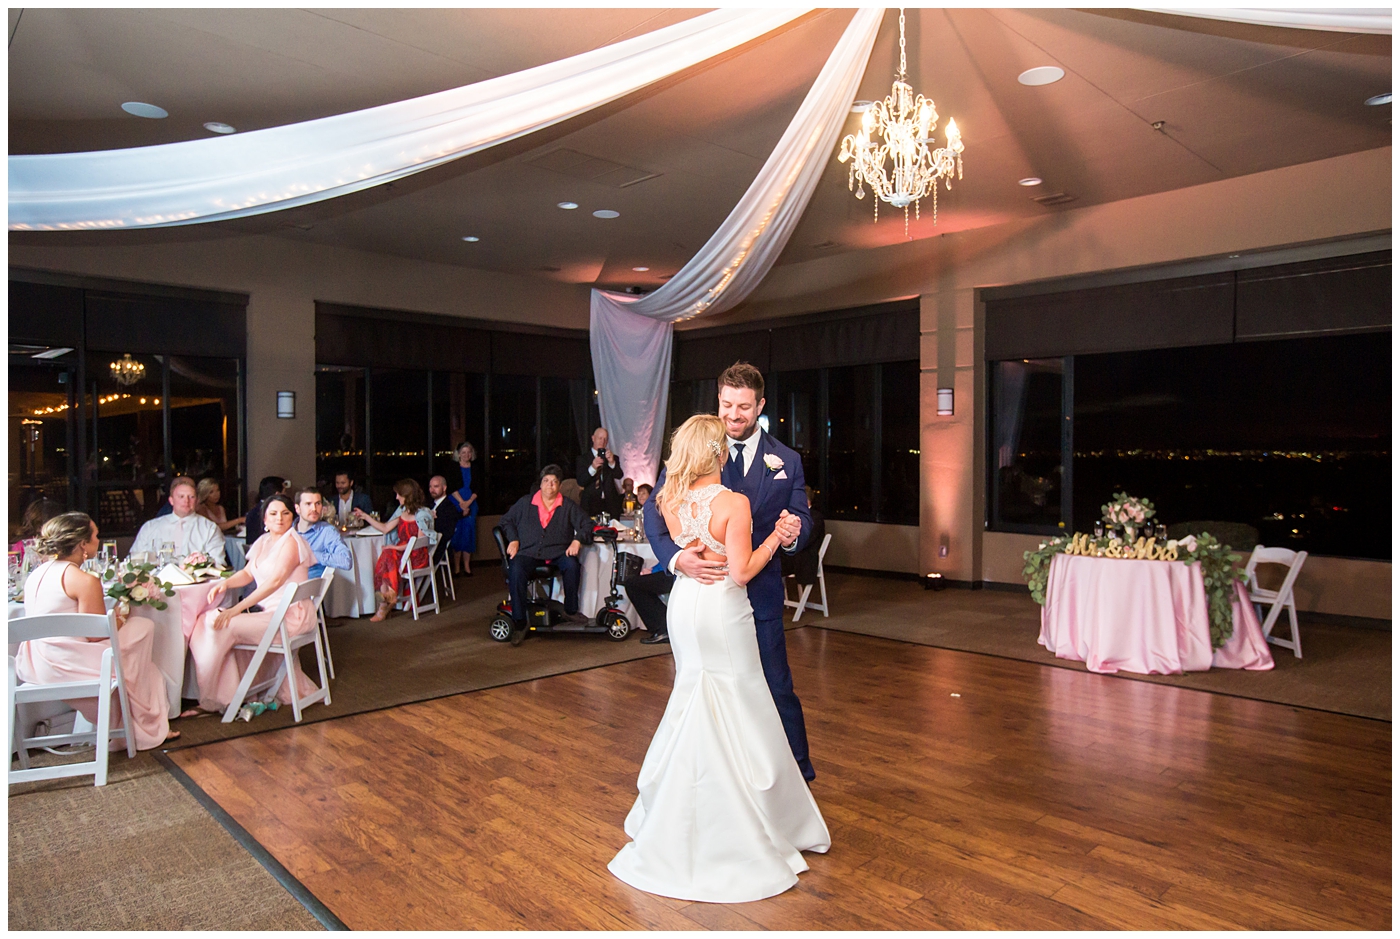 gorgeous bride with side swept hair in racerback pronovias dress and blush pink, white rose and eucalyptus greenery wedding bouquet with groom in navy suit and tie first dance at wedding reception in ballroom